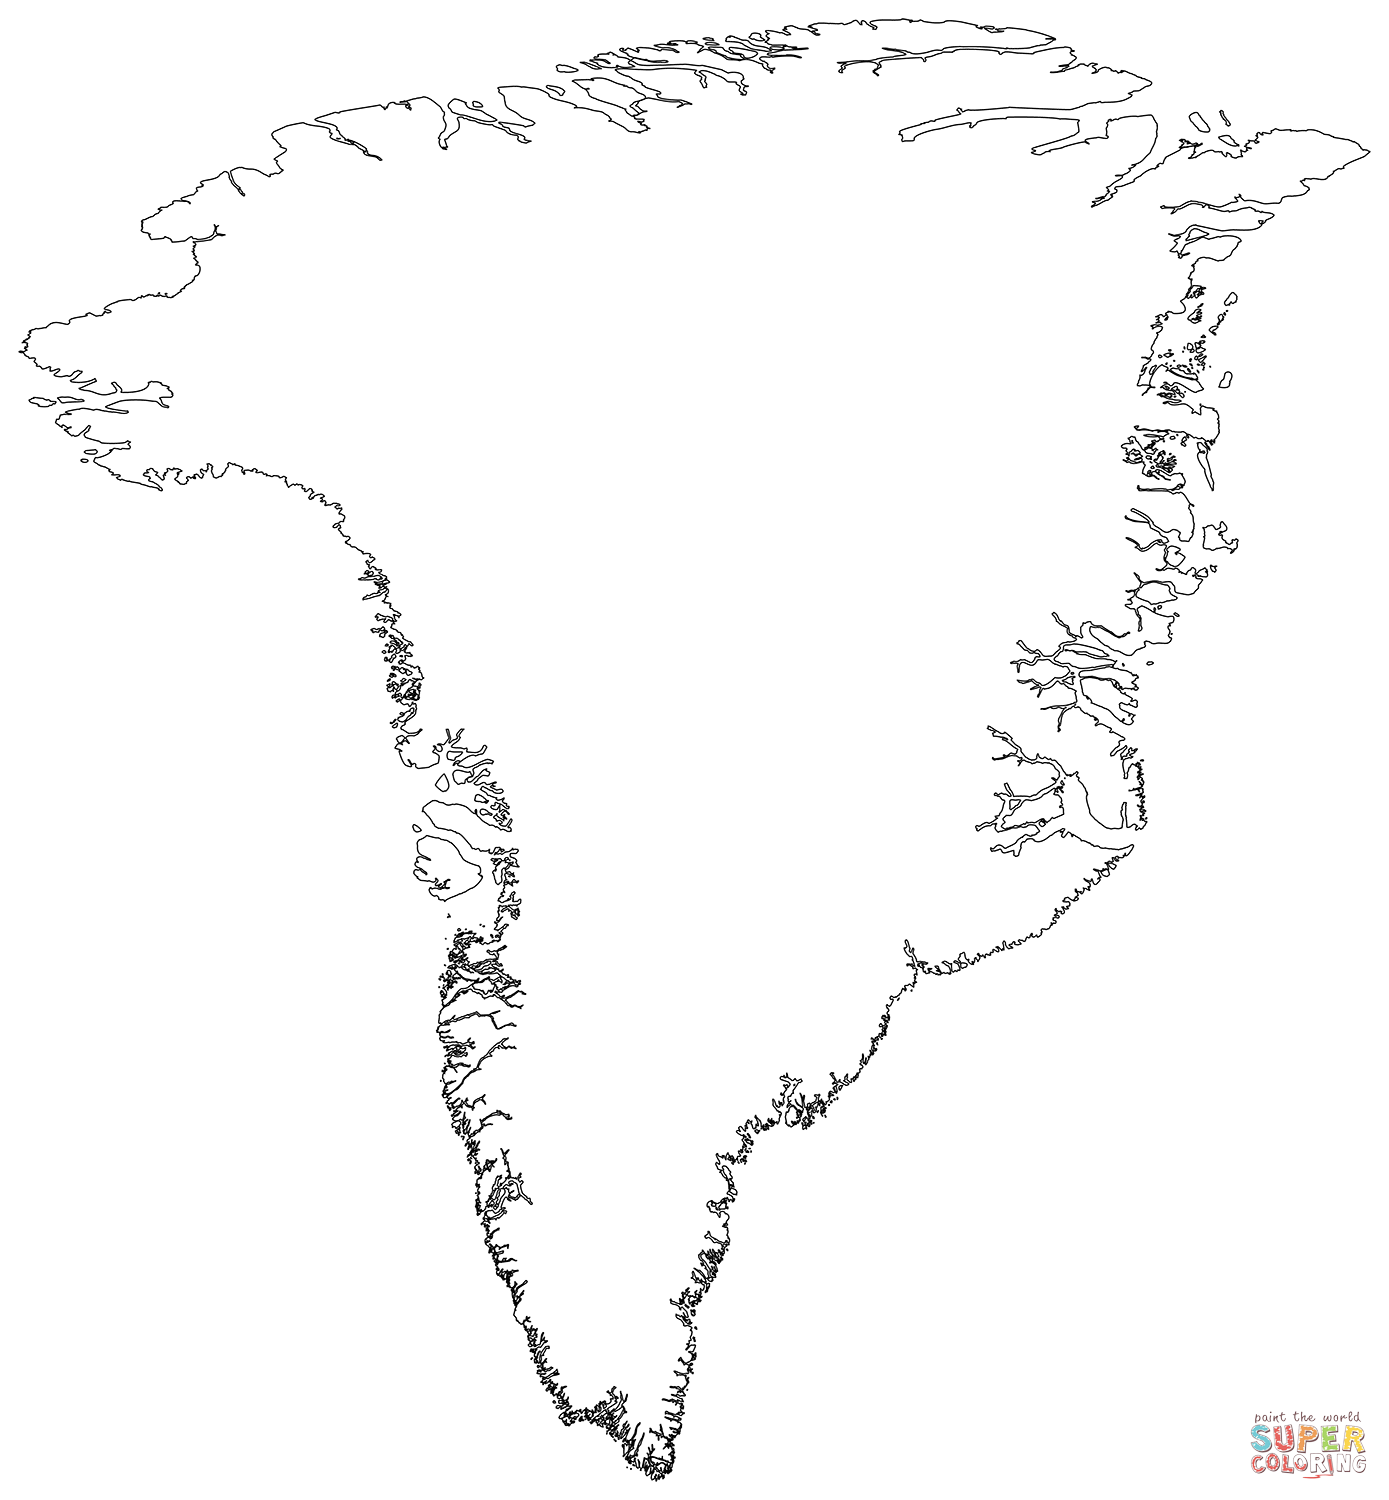 Outline Map of Greenland coloring page | Free Printable Coloring Pages